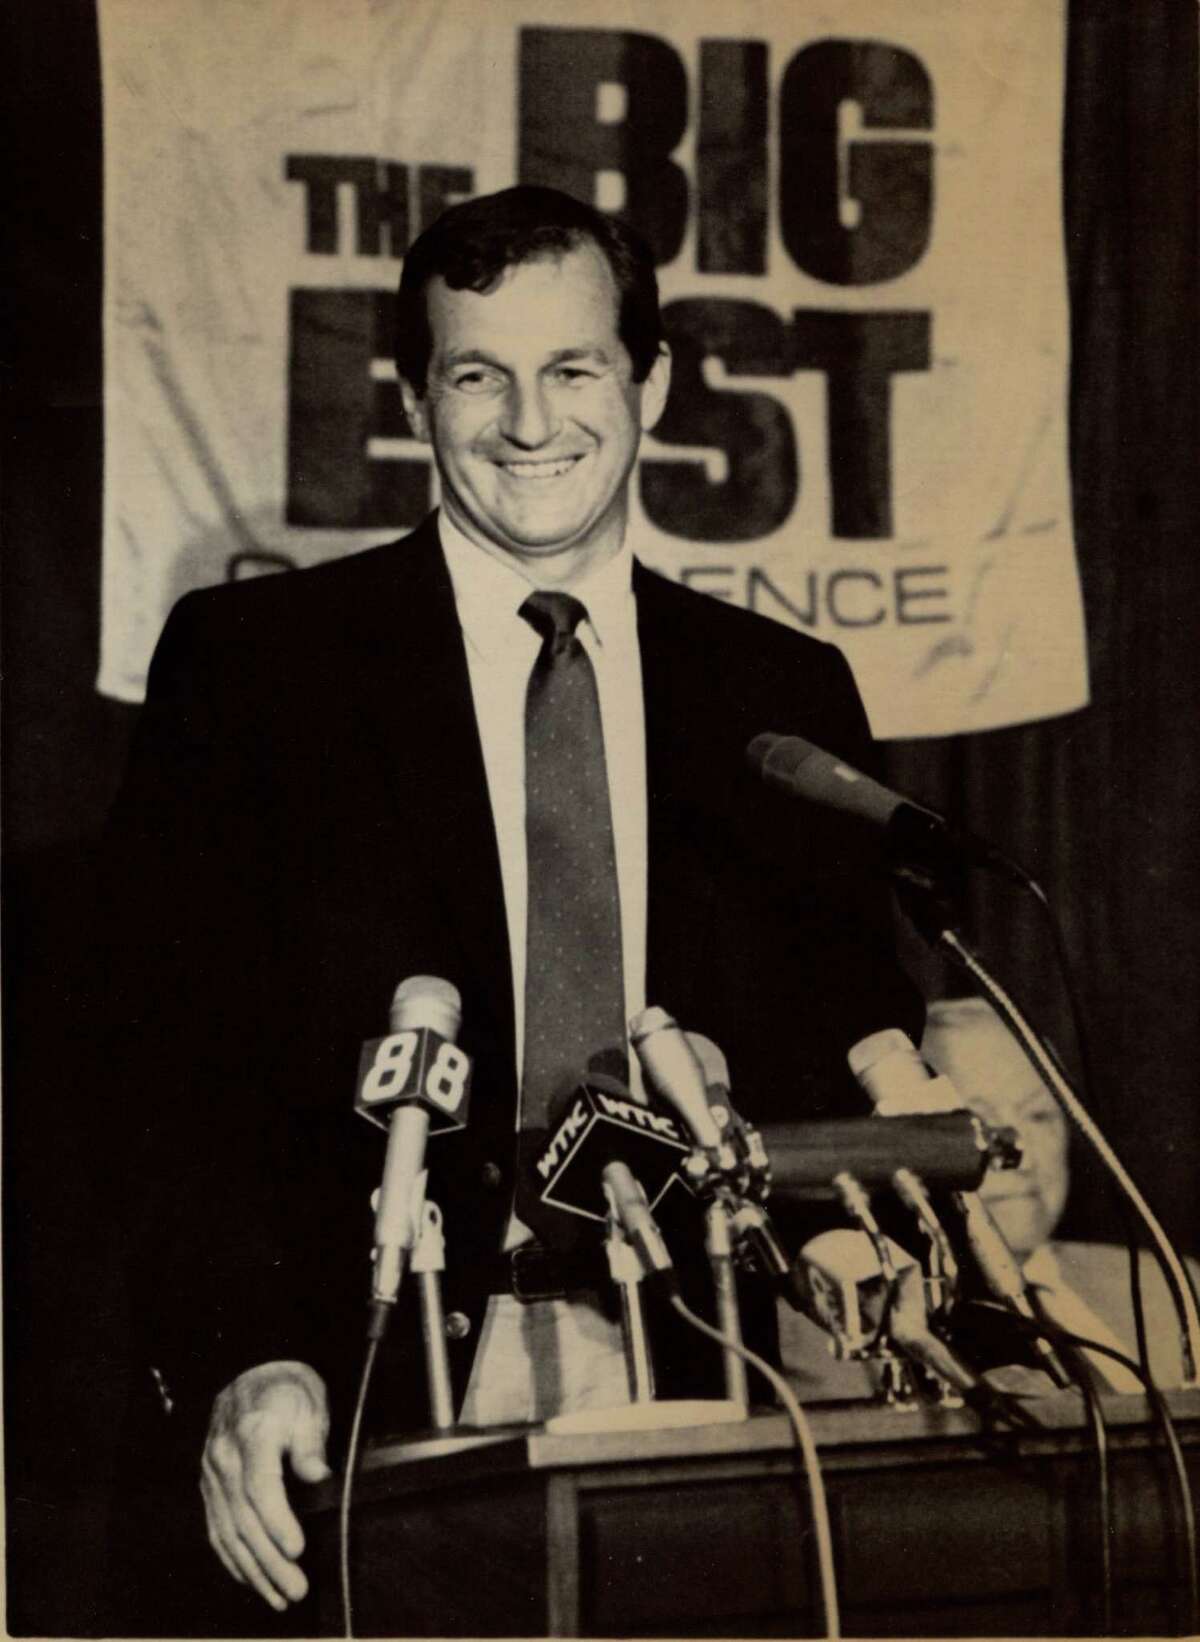 Jim Calhoun at a press conference in Storrs, Conn. where he was named the new head basketball coach at the University of Connecticut on May 15th, 1986. Calhoun, was the coach at Northeastern University for the previous 14 years.